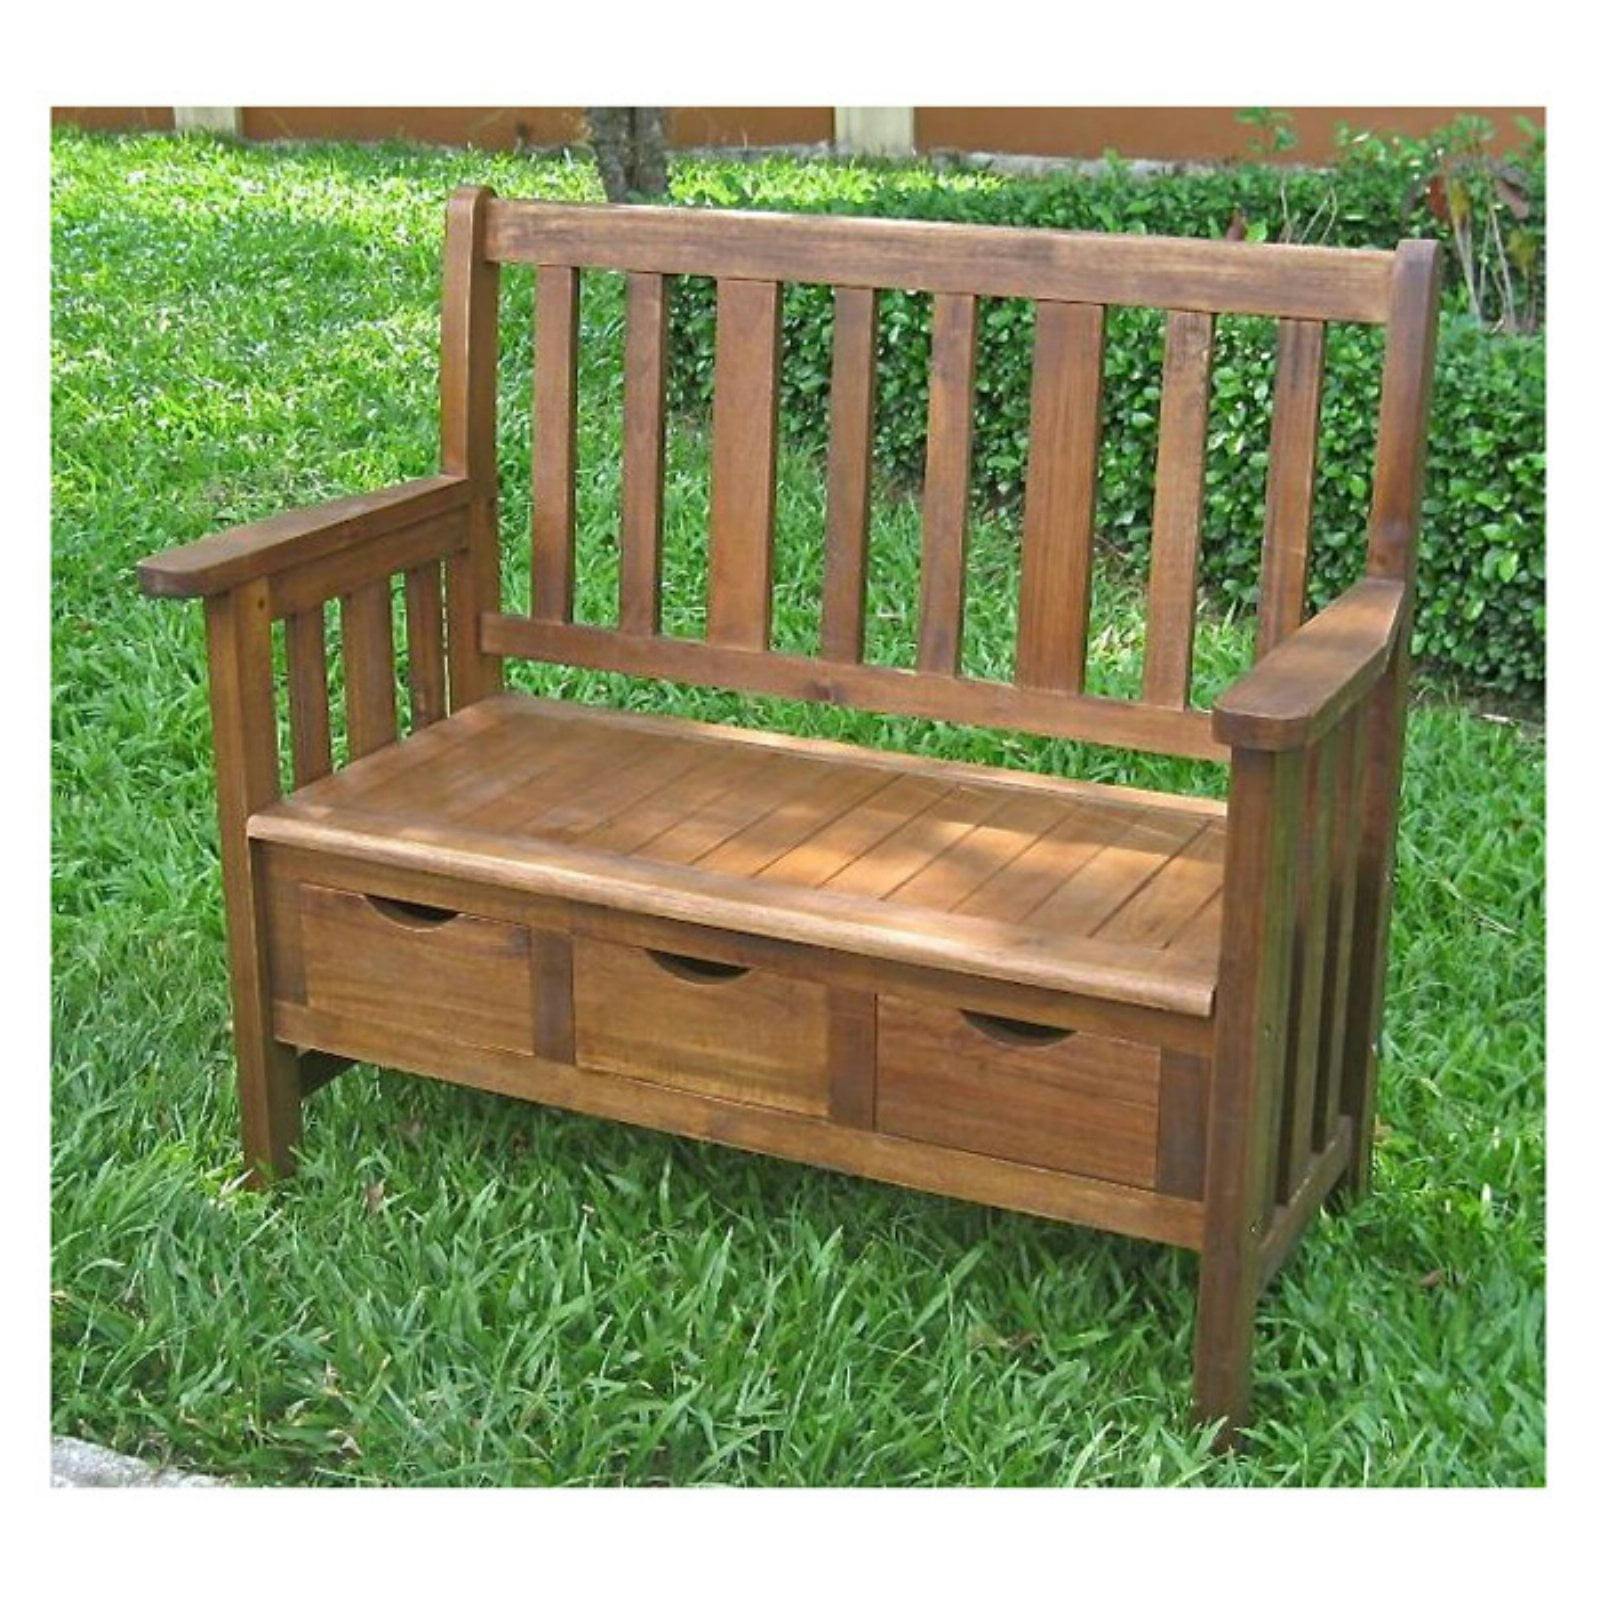 Highland Acacia 39'' Outdoor Bench with Storage Drawers, Rich Stain Finish